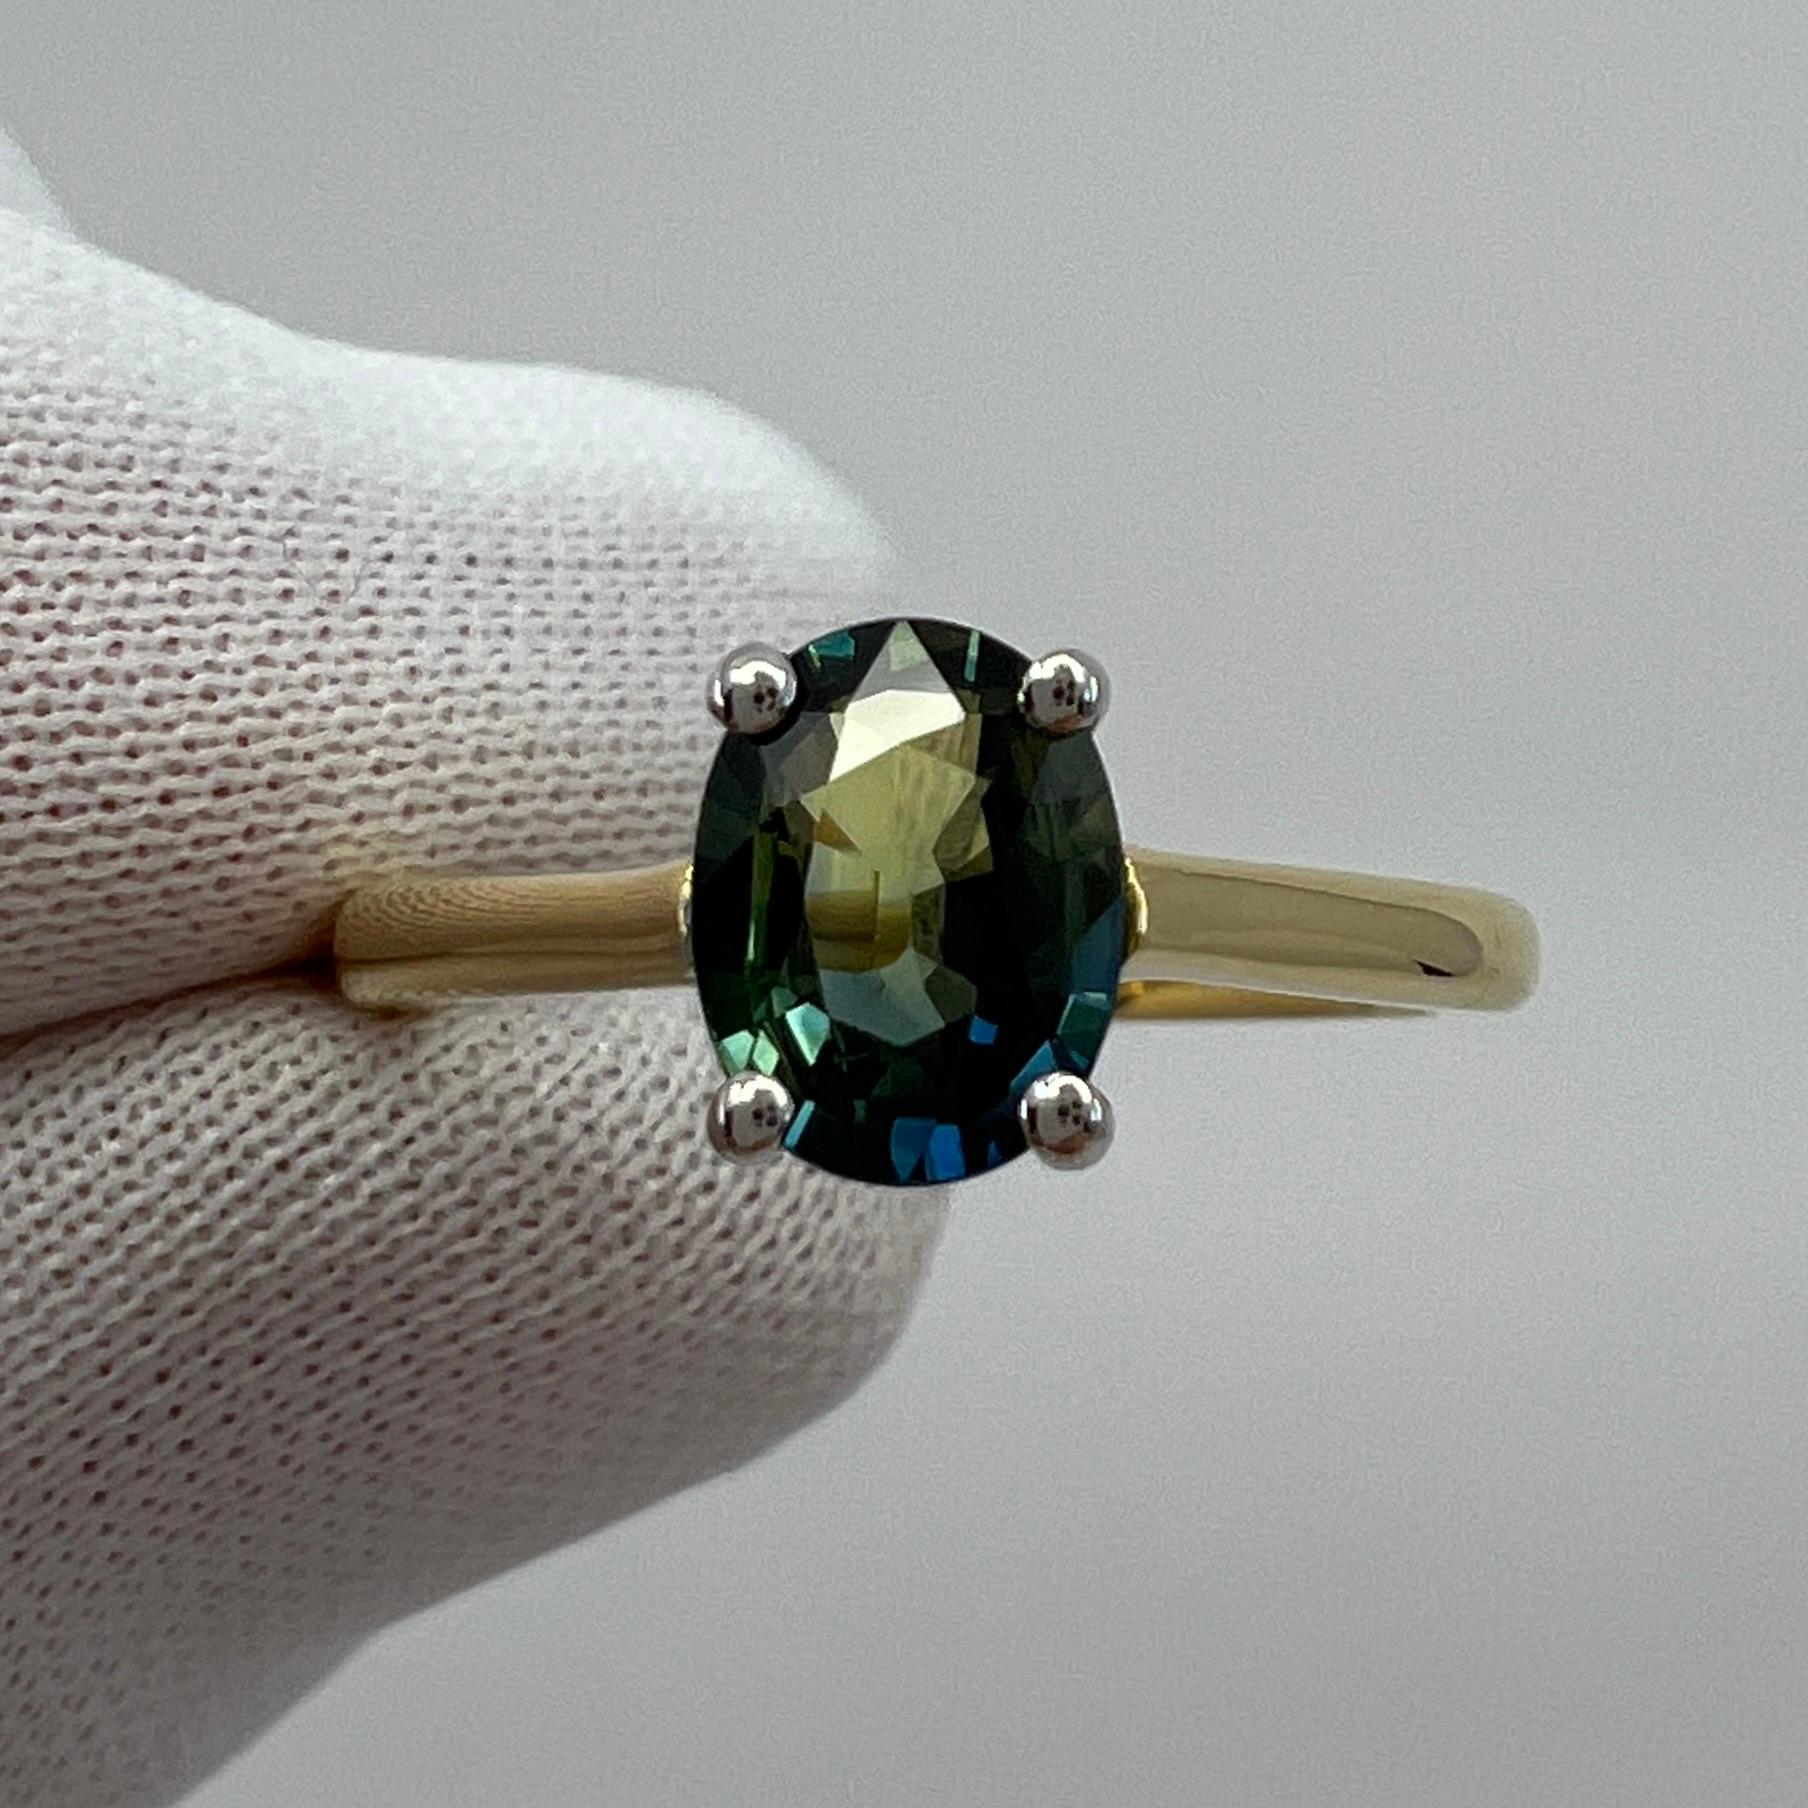 Rare Parti Colour Untreated Australian Sapphire 18k White Gold Solitaire Ring.

1.08 Carat stone with a stunning unique parti-colour effect. Yellow, blue and green green, very rare and stunning to see. 

Also has excellent clarity, very clean stone.